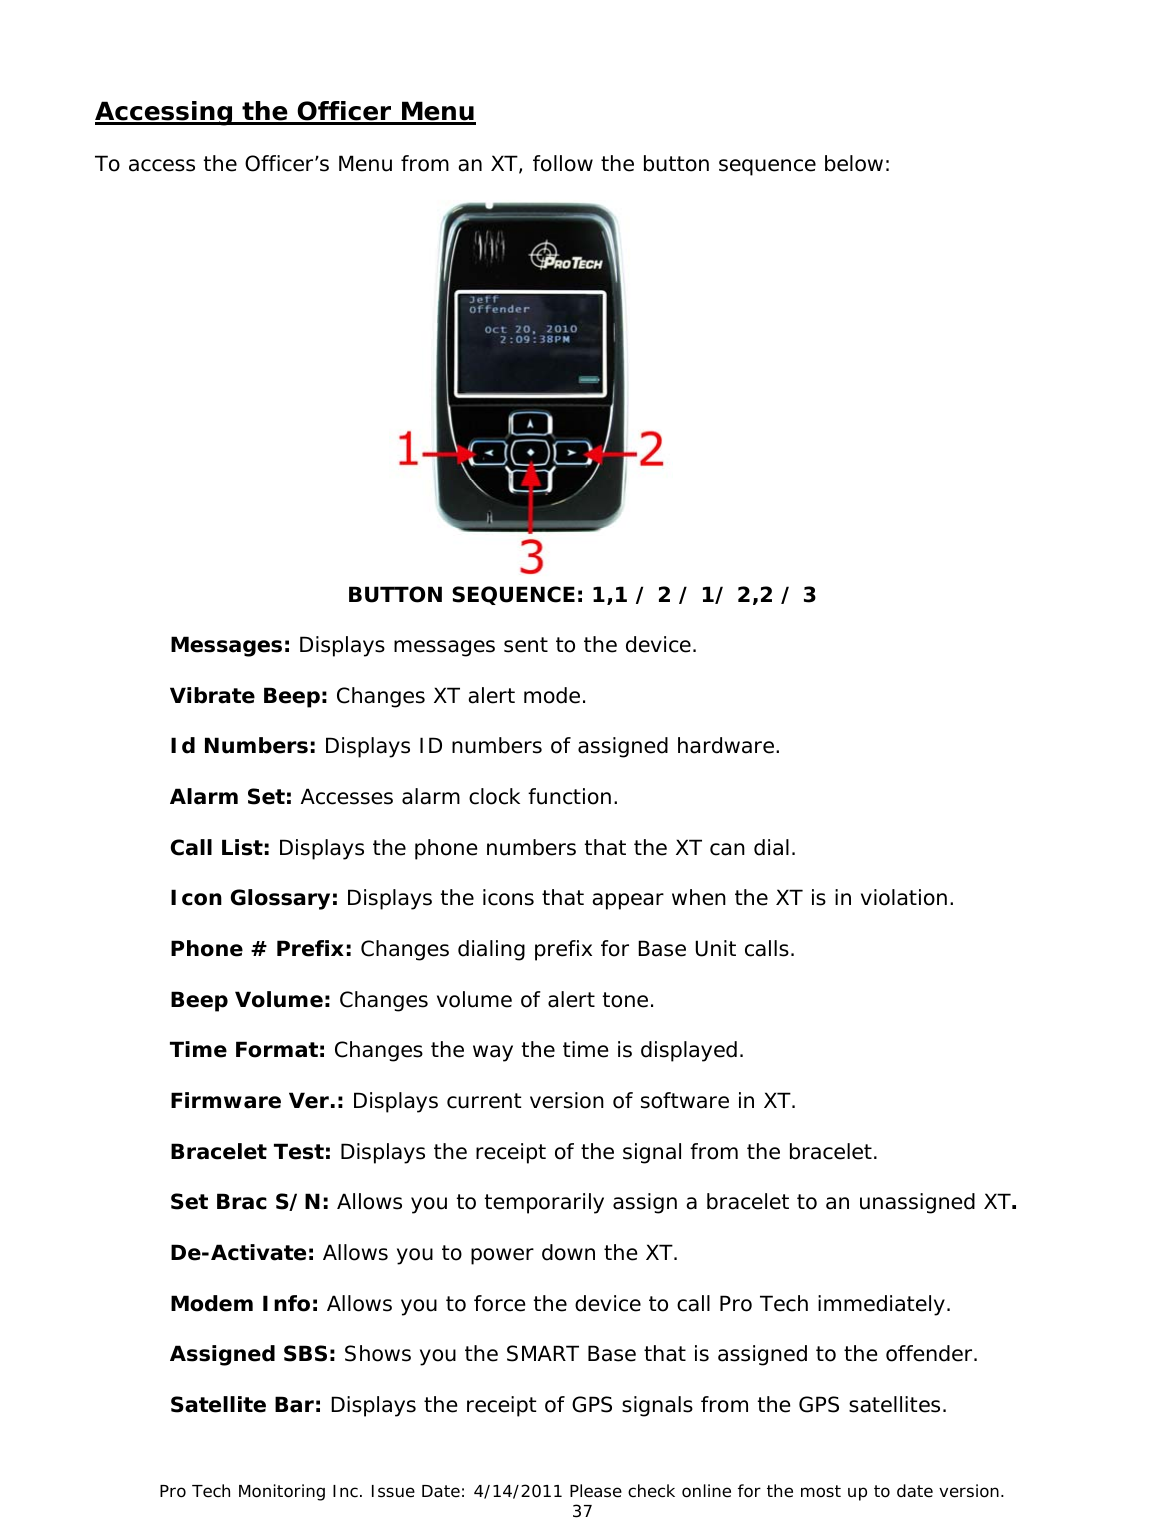 Pro Tech Monitoring Inc. Issue Date: 4/14/2011 Please check online for the most up to date version. 37  Accessing the Officer Menu  To access the Officer’s Menu from an XT, follow the button sequence below:                 BUTTON SEQUENCE: 1,1 / 2 / 1/ 2,2 / 3  Messages: Displays messages sent to the device.  Vibrate Beep: Changes XT alert mode.  Id Numbers: Displays ID numbers of assigned hardware.  Alarm Set: Accesses alarm clock function.  Call List: Displays the phone numbers that the XT can dial.  Icon Glossary: Displays the icons that appear when the XT is in violation.  Phone # Prefix: Changes dialing prefix for Base Unit calls.  Beep Volume: Changes volume of alert tone.  Time Format: Changes the way the time is displayed.  Firmware Ver.: Displays current version of software in XT.  Bracelet Test: Displays the receipt of the signal from the bracelet.  Set Brac S/N: Allows you to temporarily assign a bracelet to an unassigned XT.  De-Activate: Allows you to power down the XT.  Modem Info: Allows you to force the device to call Pro Tech immediately.  Assigned SBS: Shows you the SMART Base that is assigned to the offender.  Satellite Bar: Displays the receipt of GPS signals from the GPS satellites. 